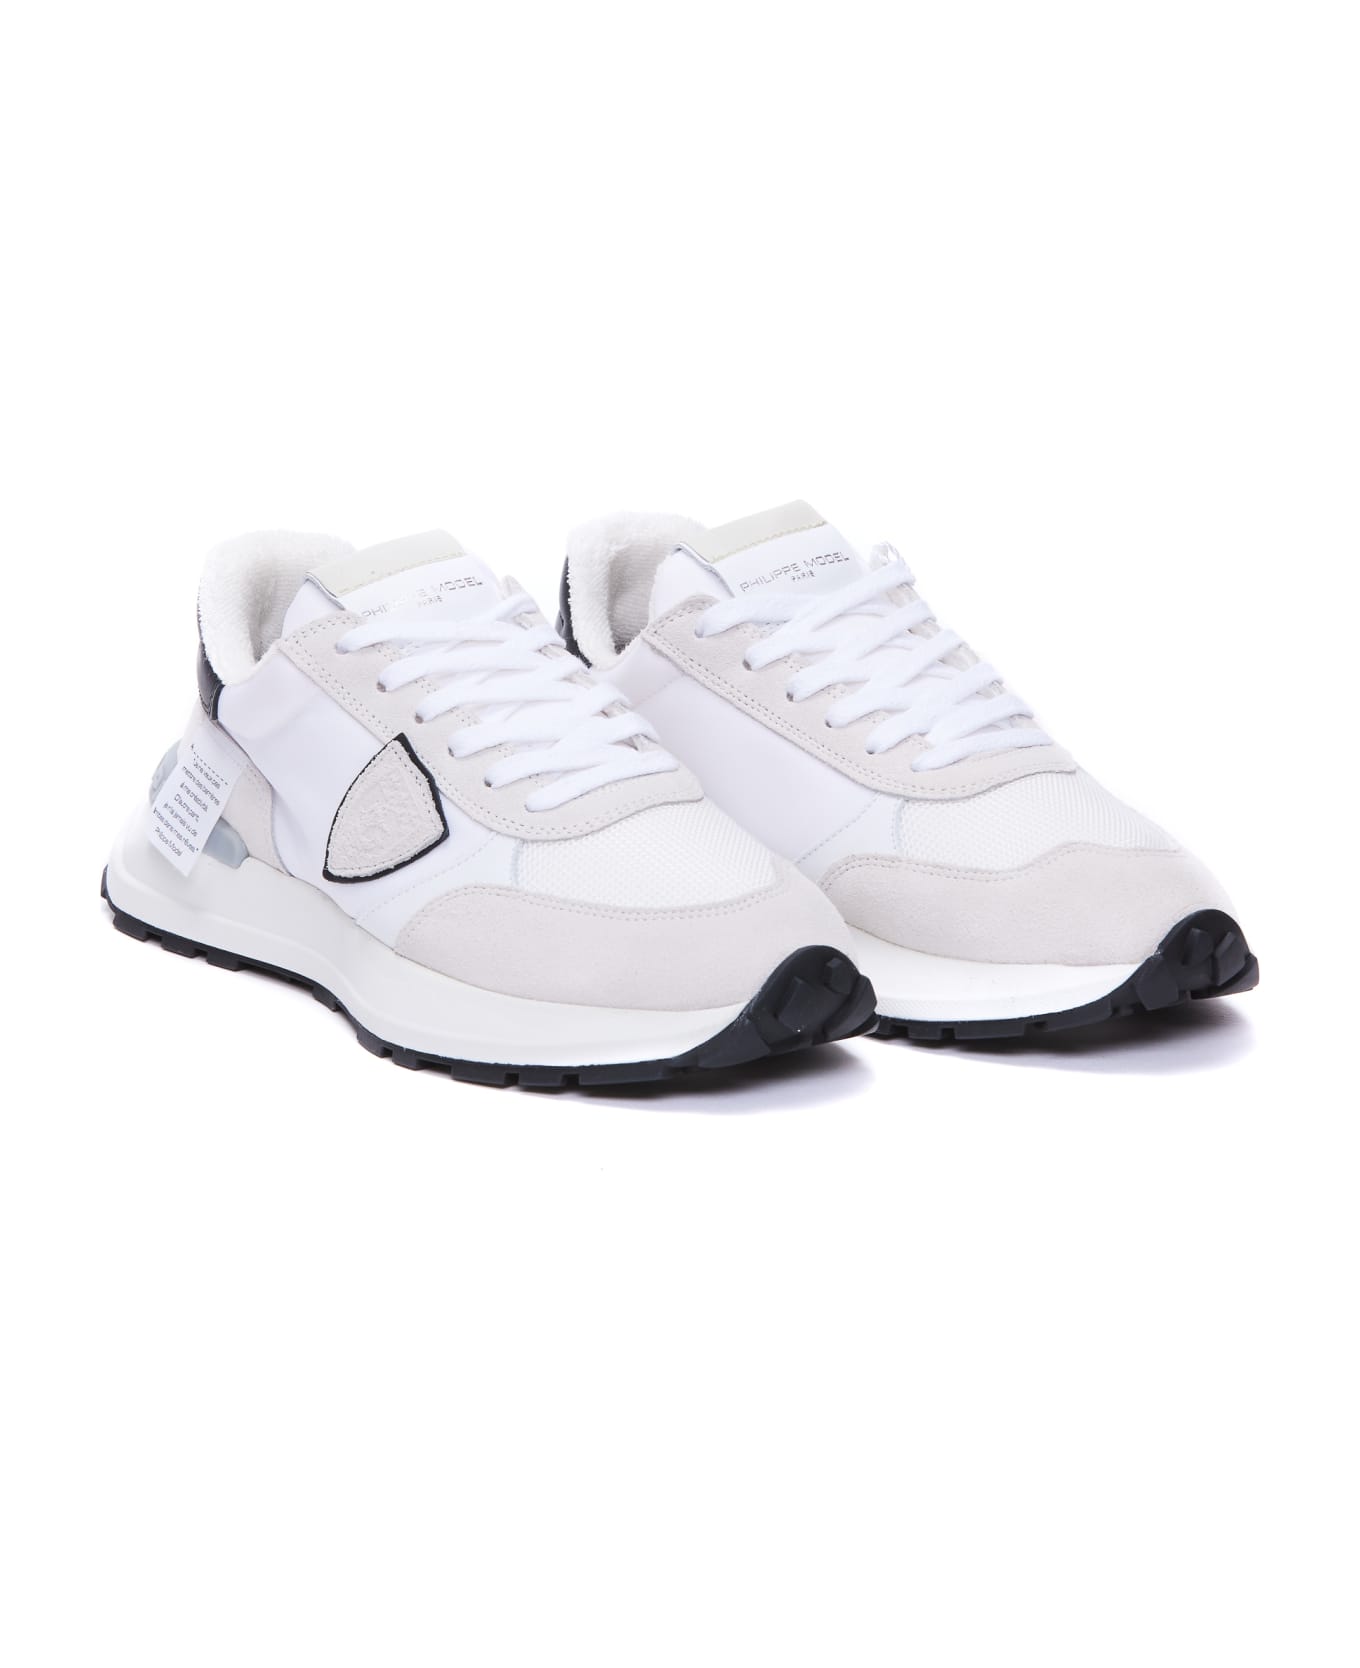 Philippe Model Antibes Sneakers - White